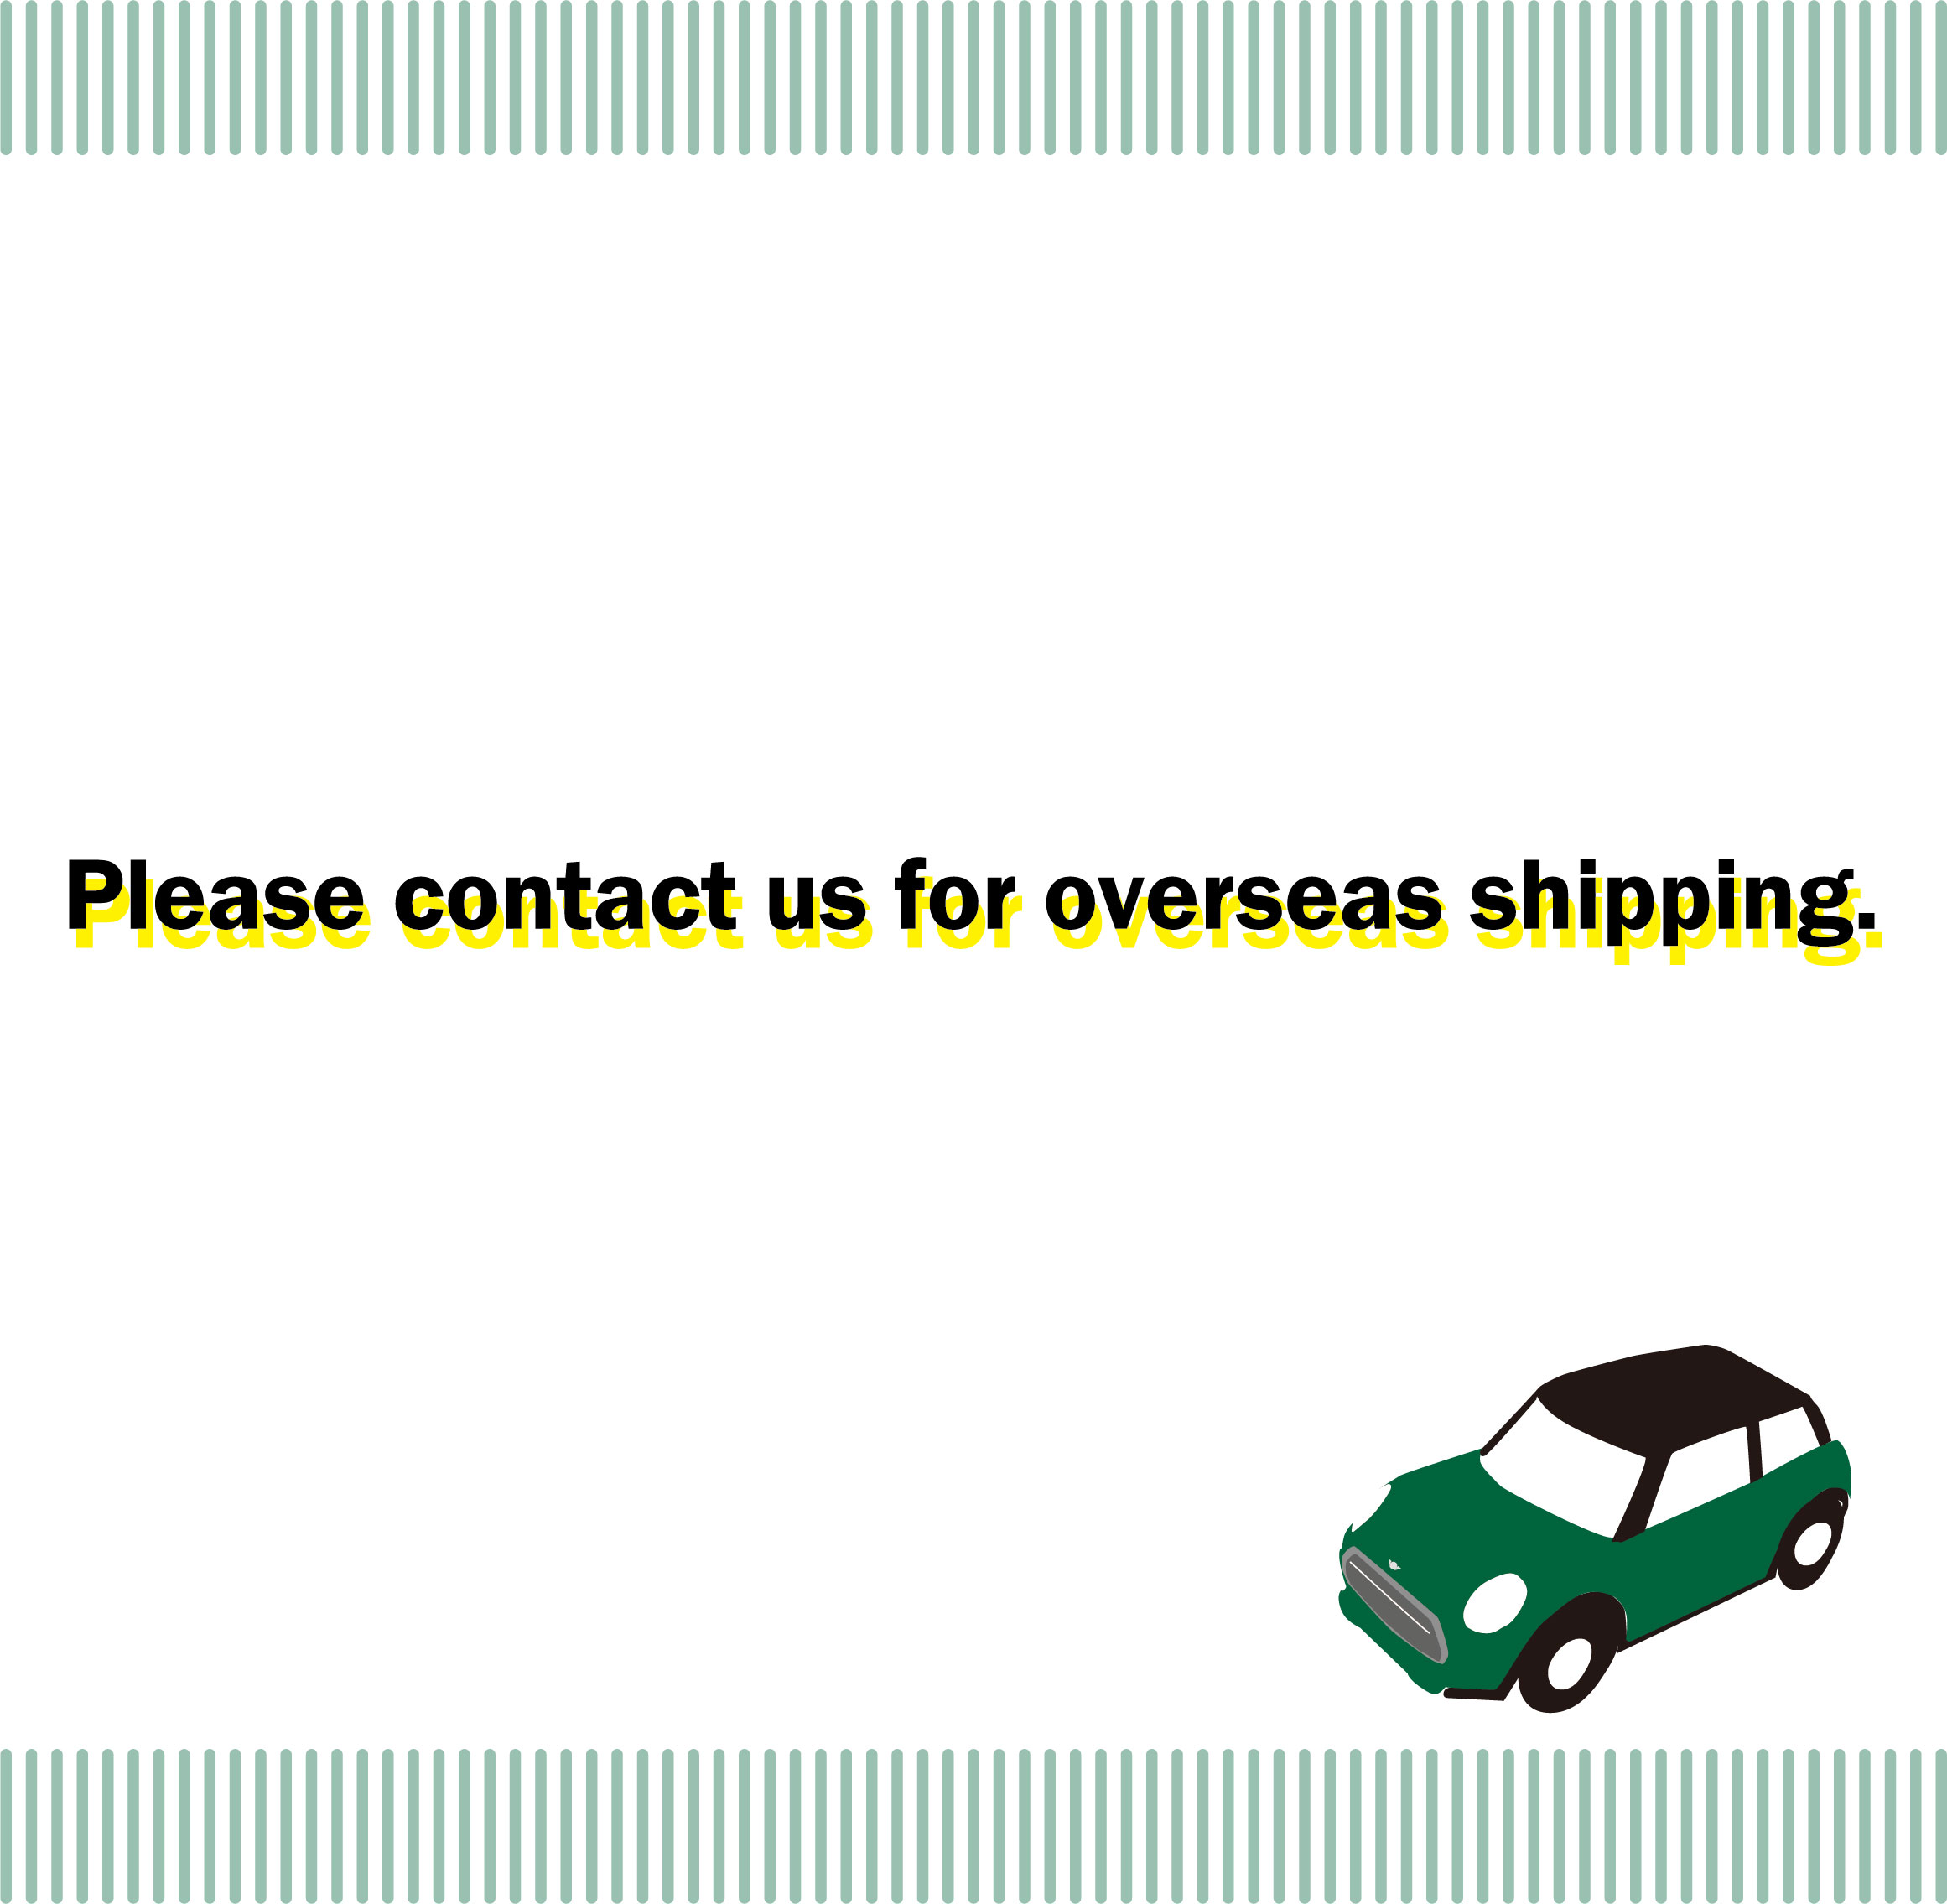 ★Please contact us for overseas shipping★